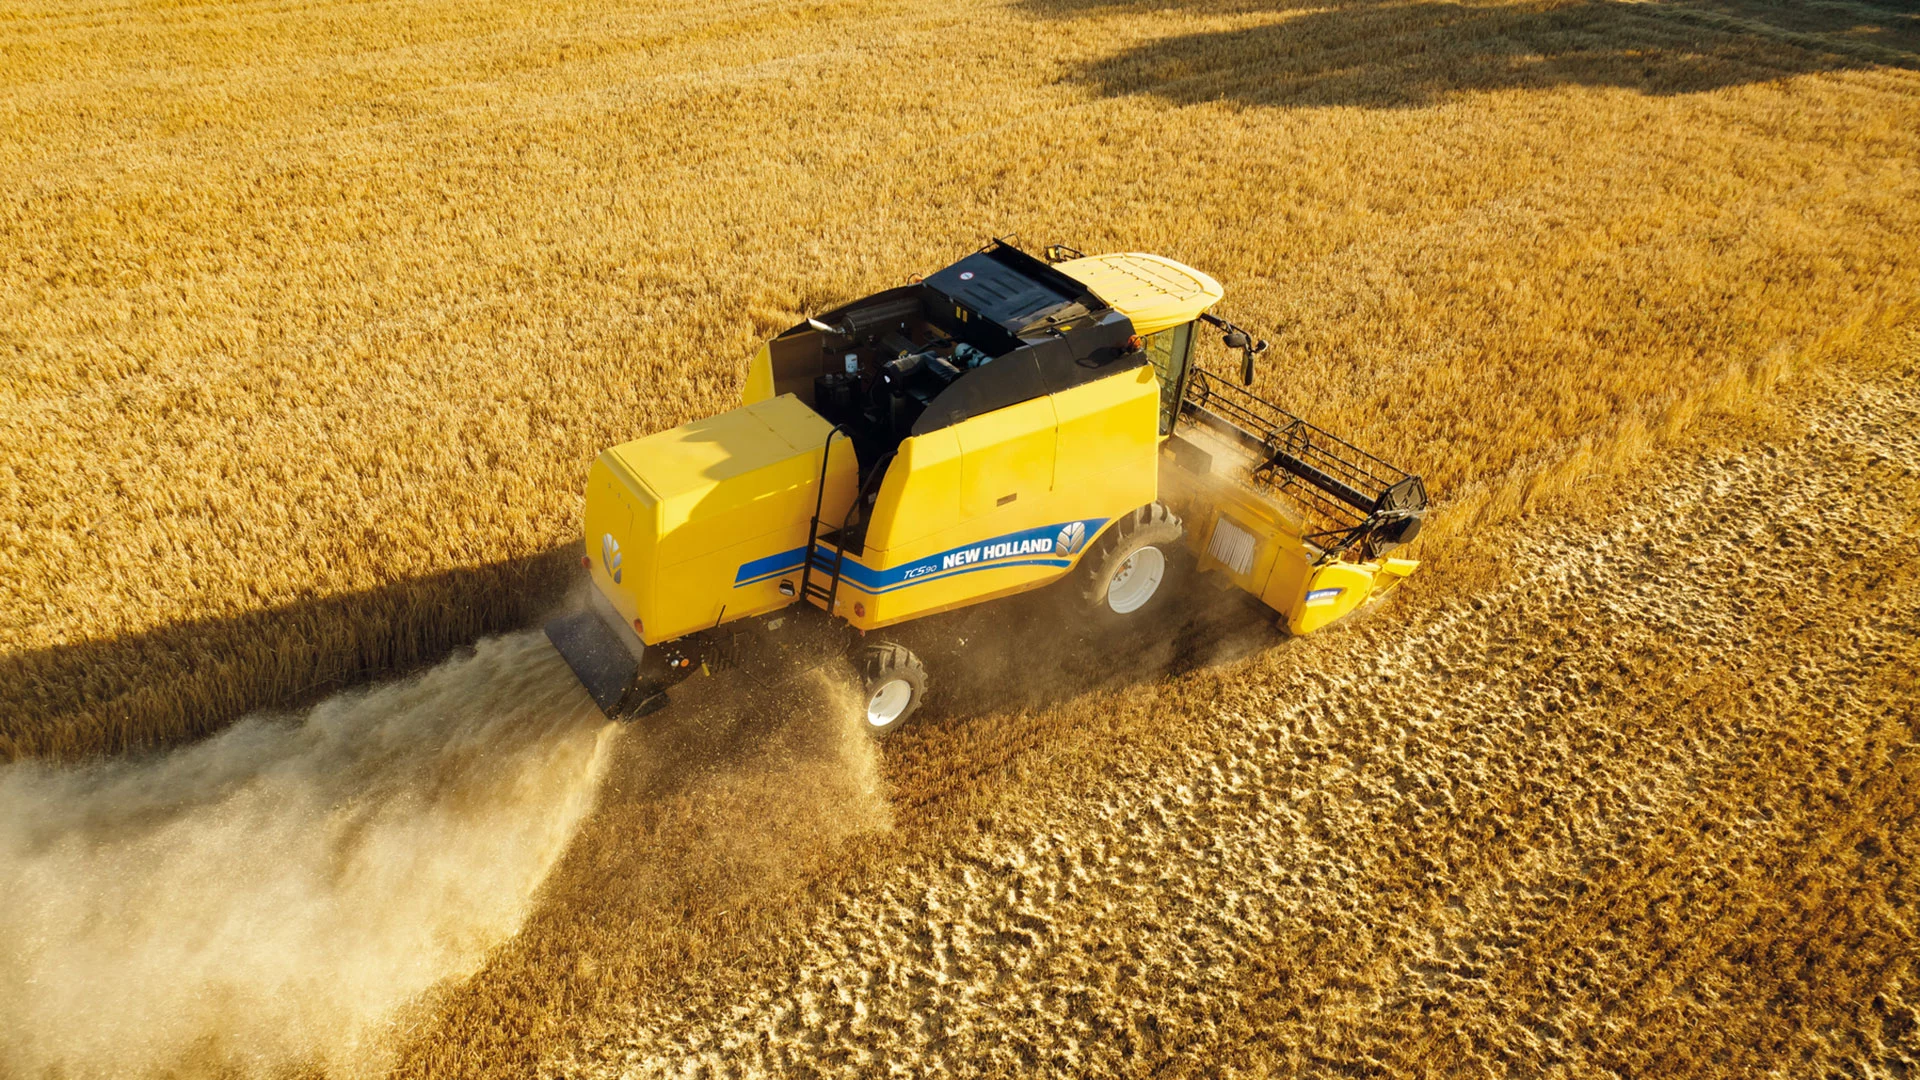 New Holland's TC Combine Harvester working on the field